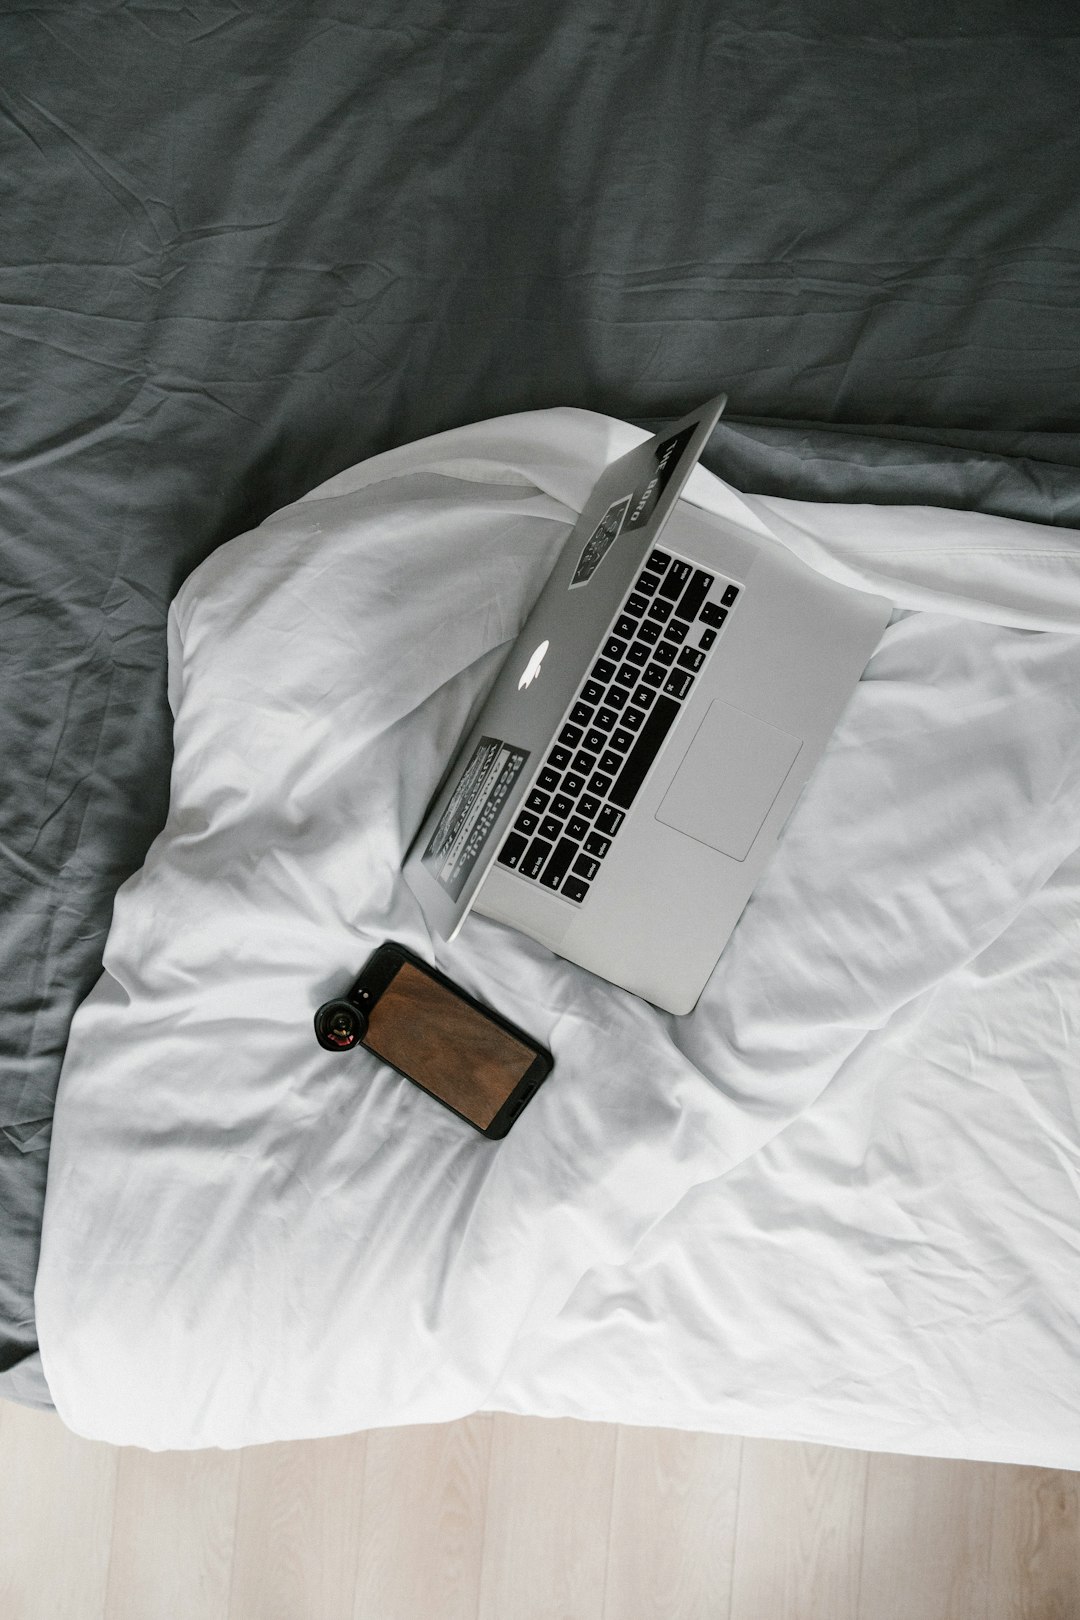 macbook pro beside brown leather wallet on white bed